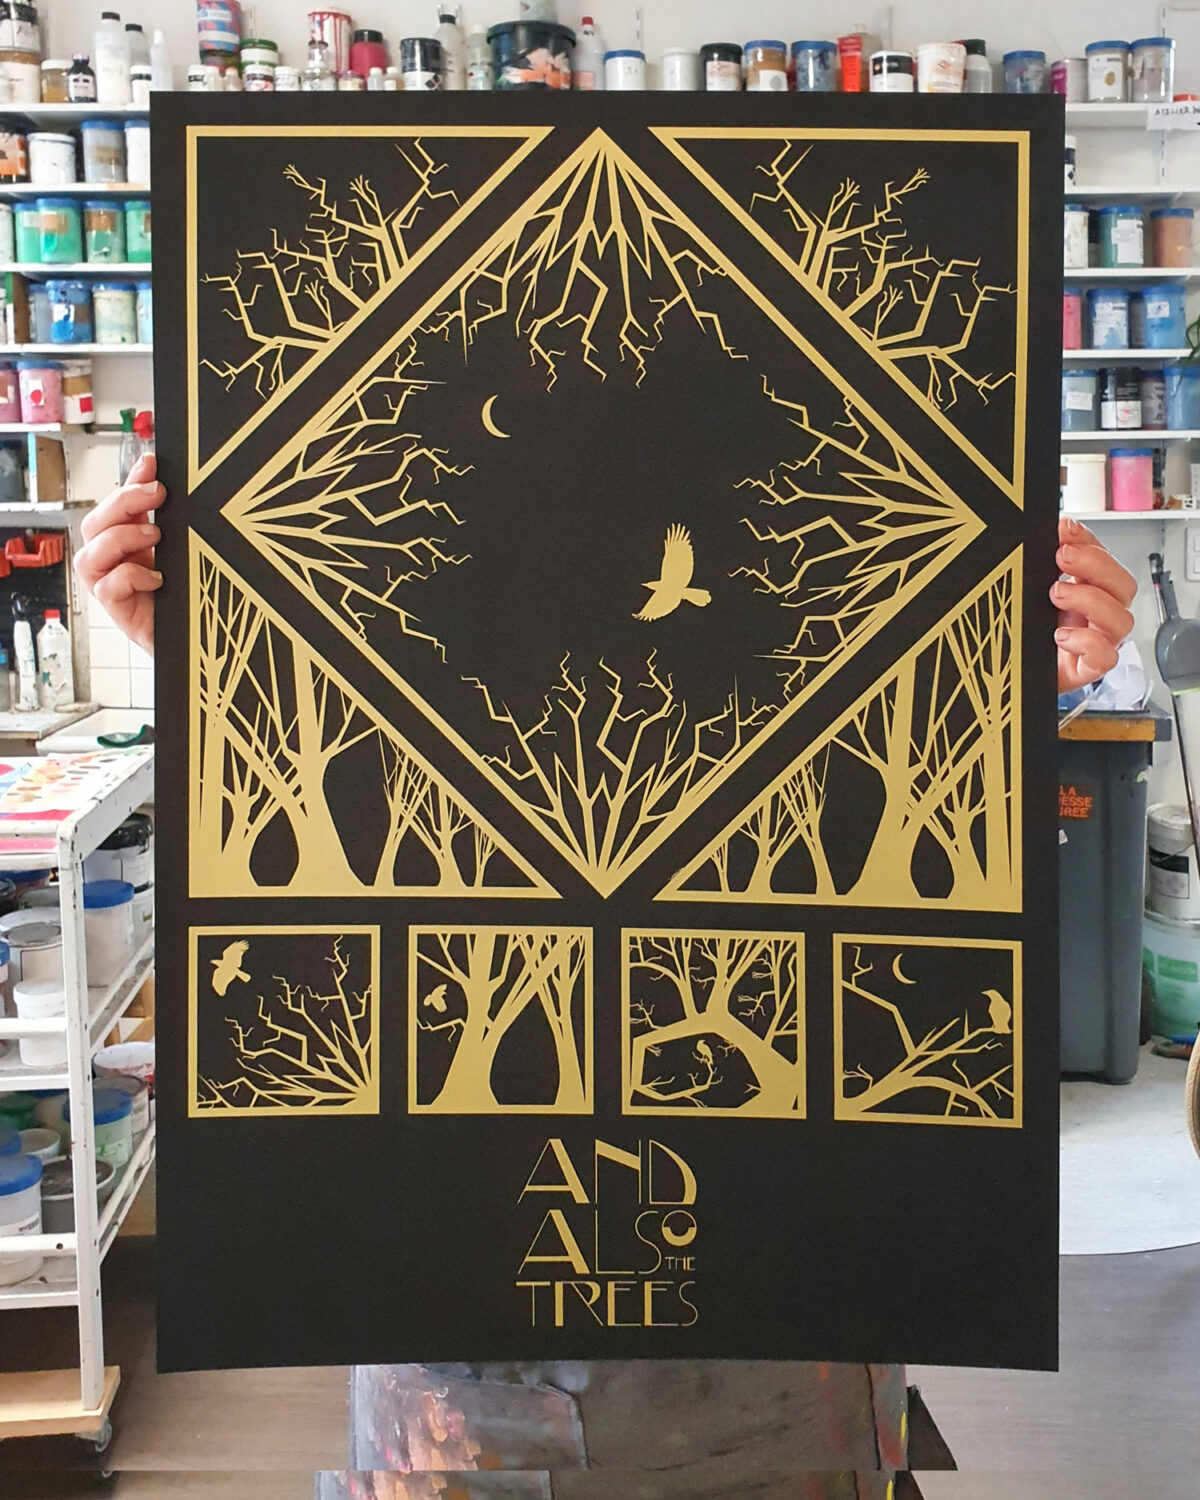 and also the trees poster2